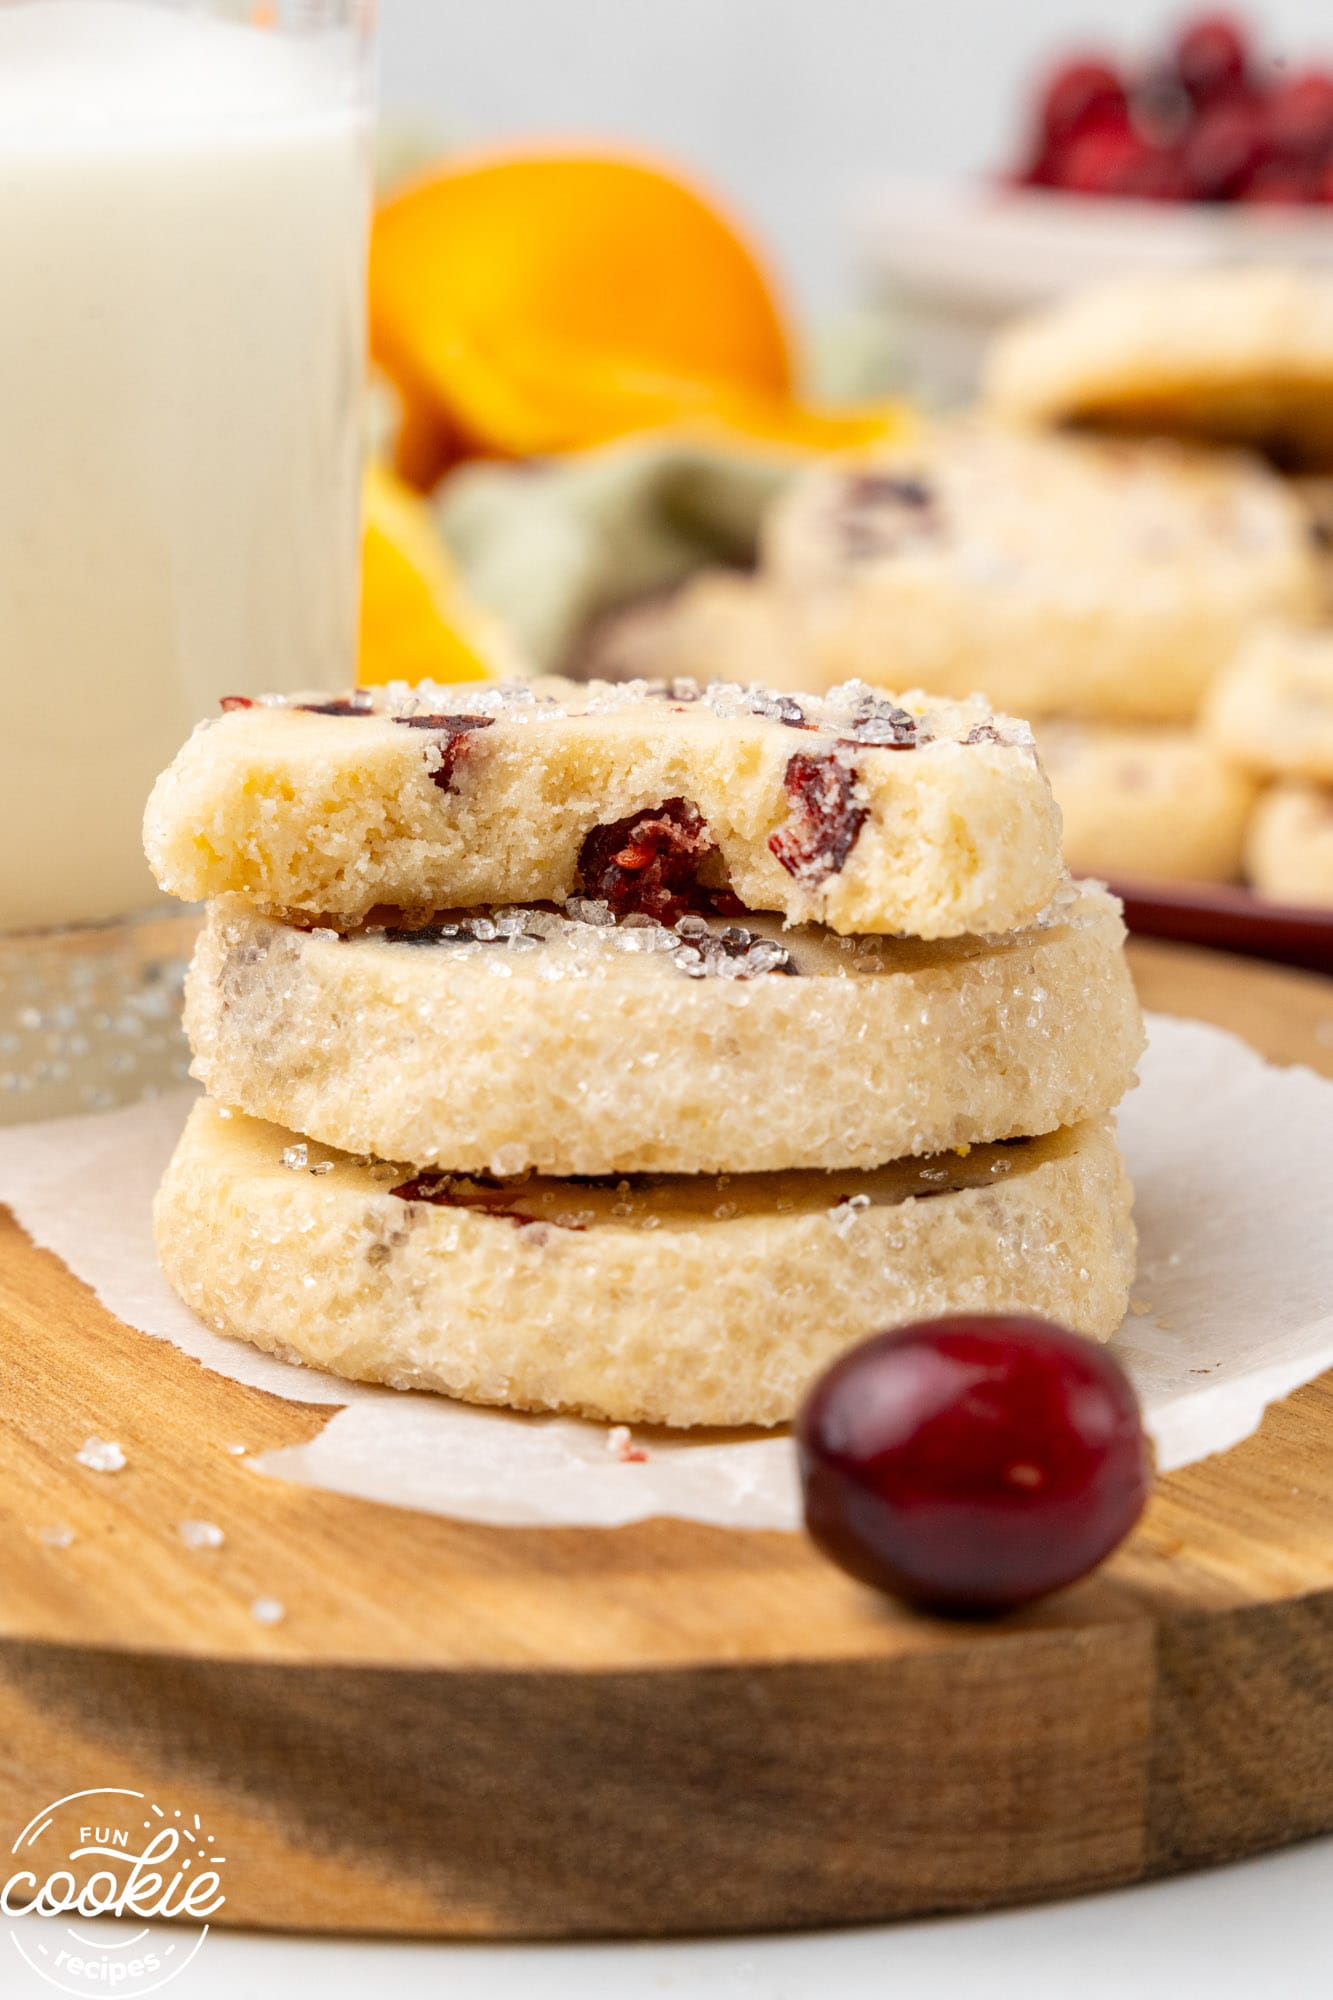 three cookies with cranberries and orange stacked. One has a bite taken. In the background is a glass of milk. 